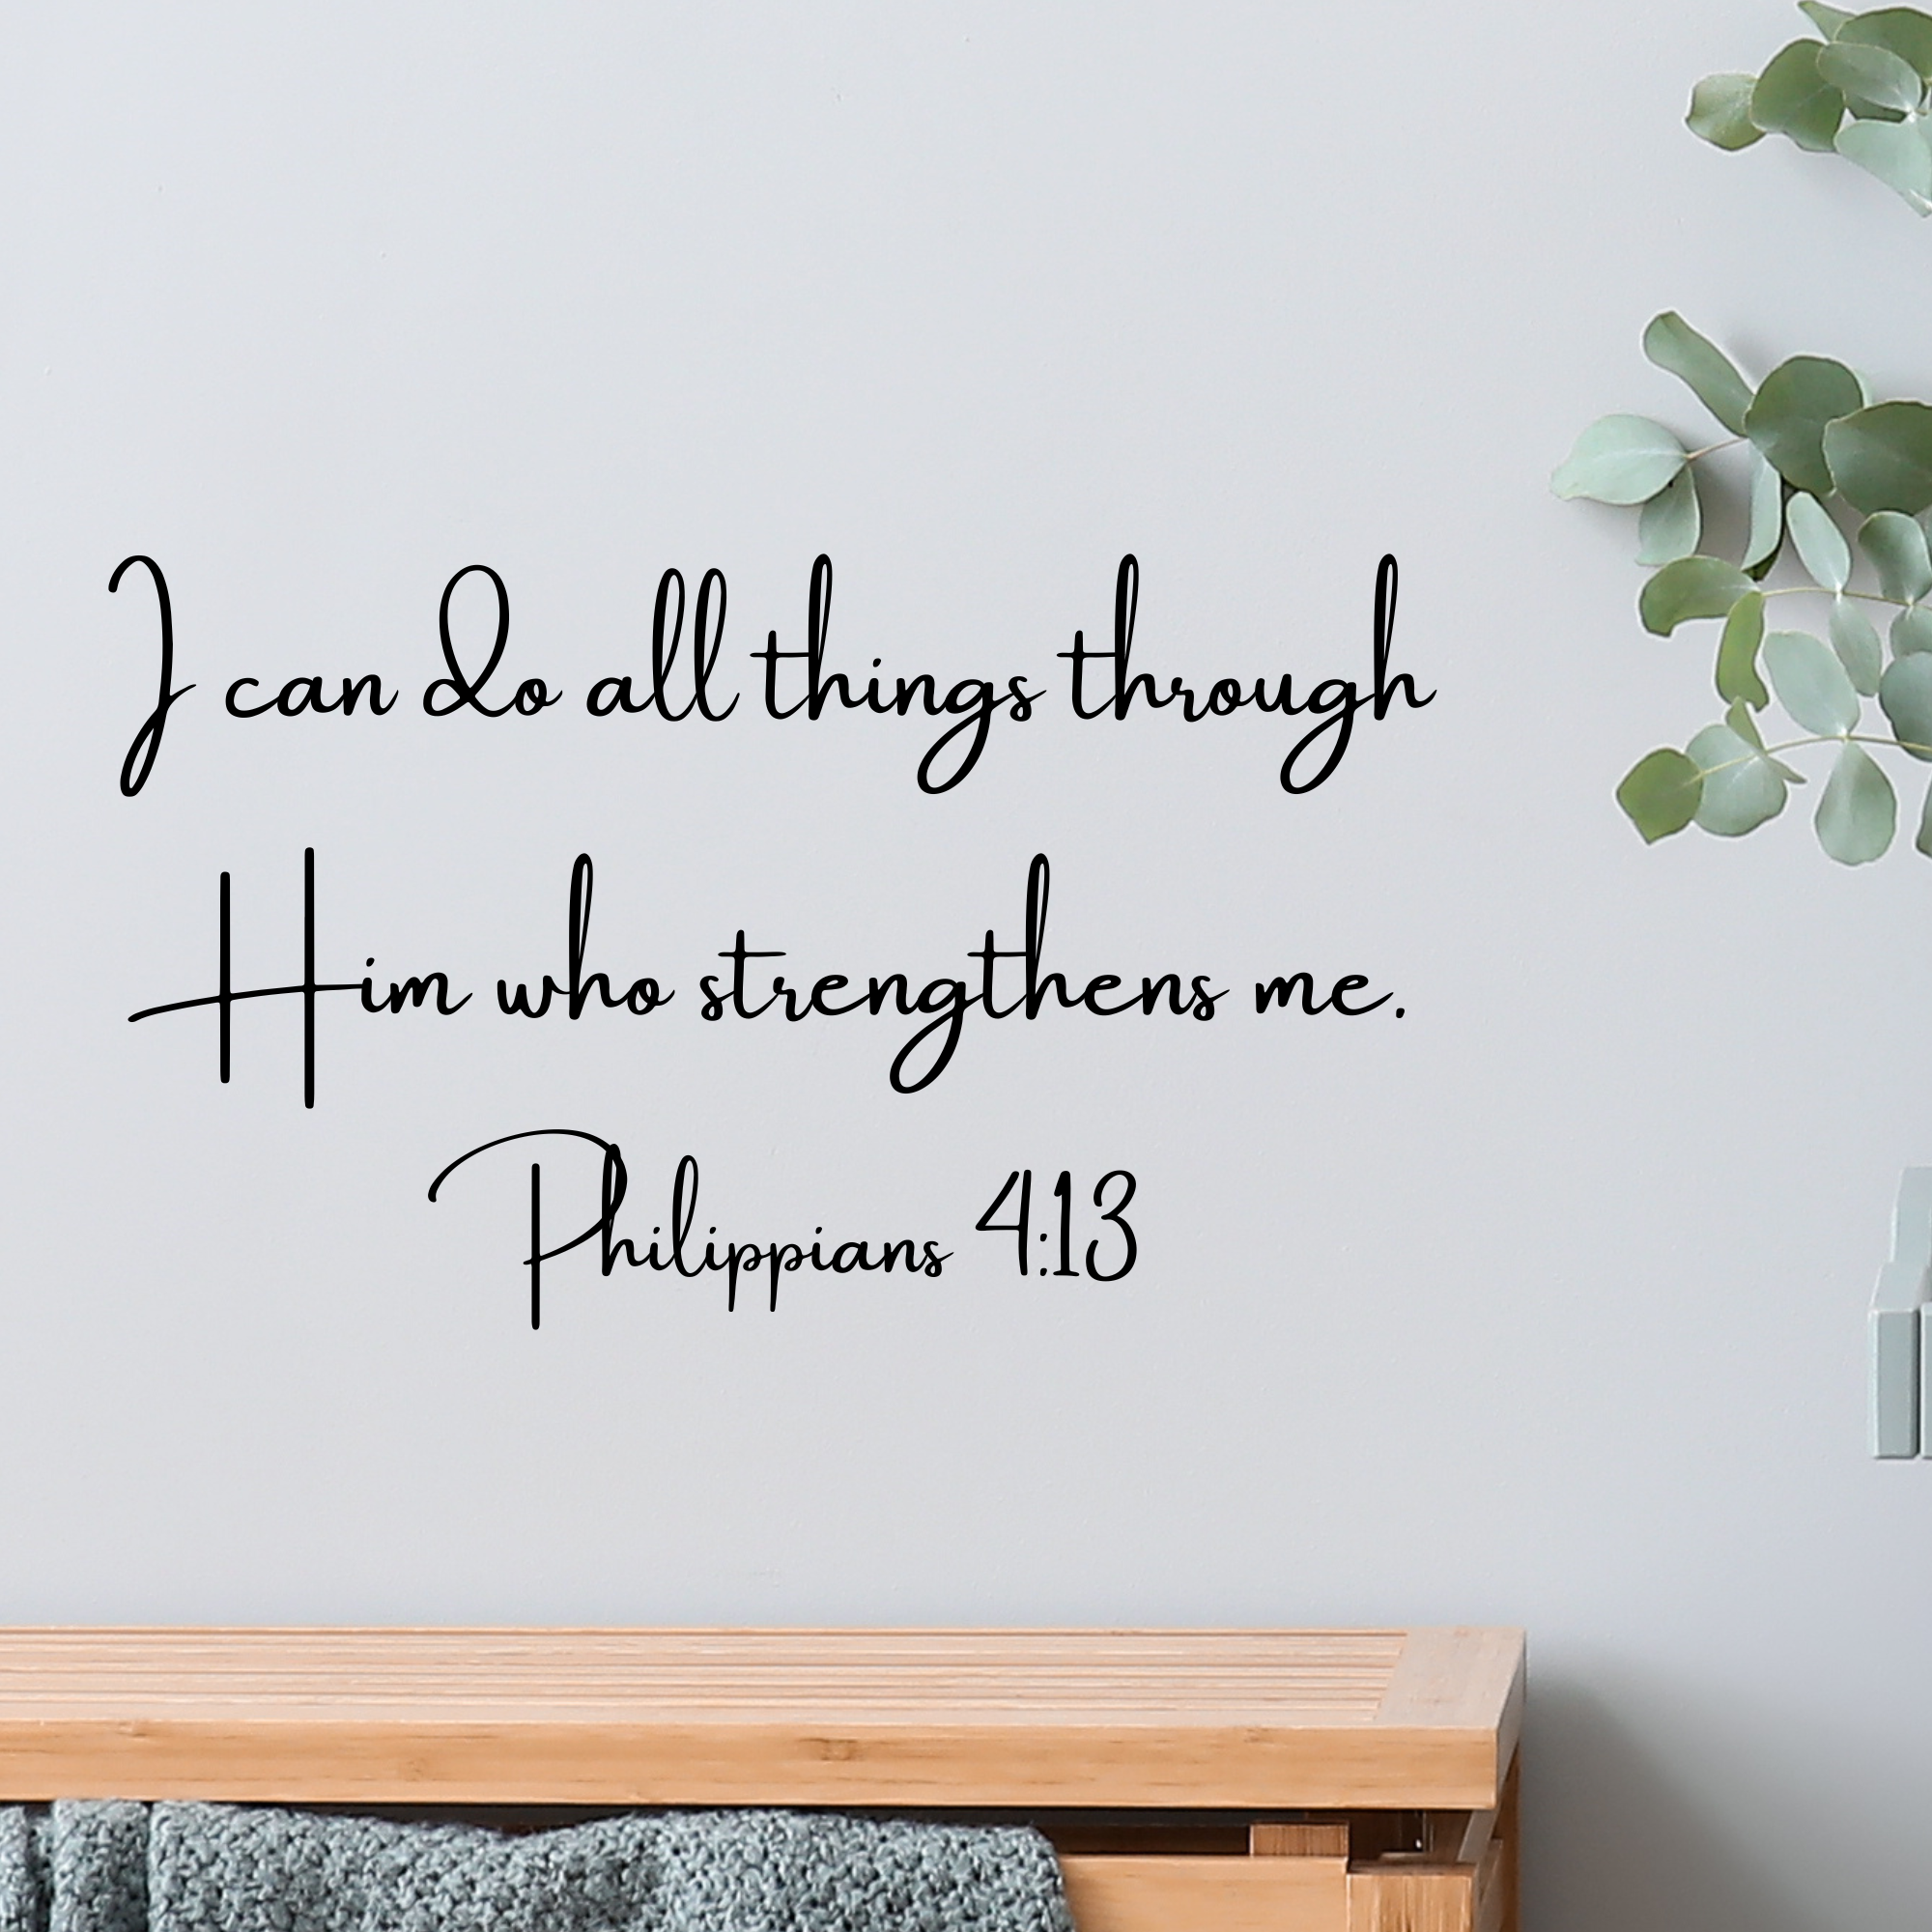 Uplifting Scripture wall decal featuring a Bible verse in a modern font displayed on a living room wall.